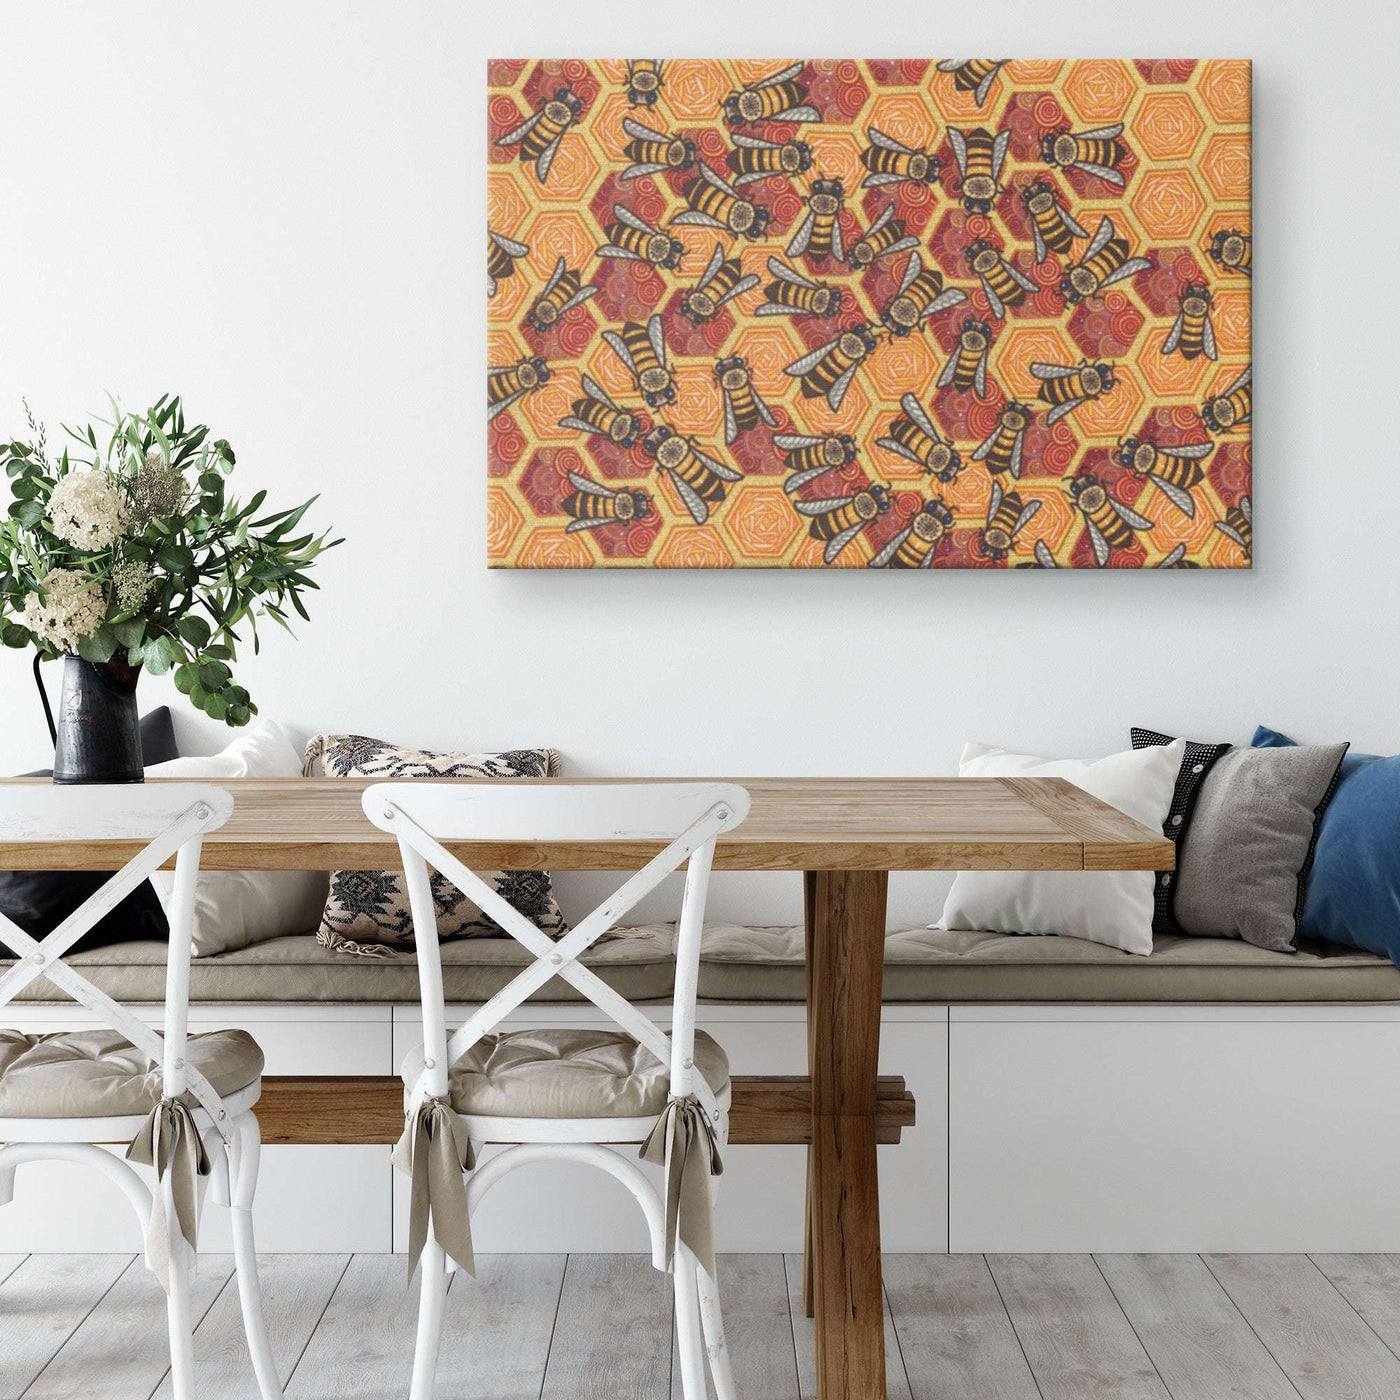 A modern dining area with the Honeycomb Harmony Canvas Print on the wall.